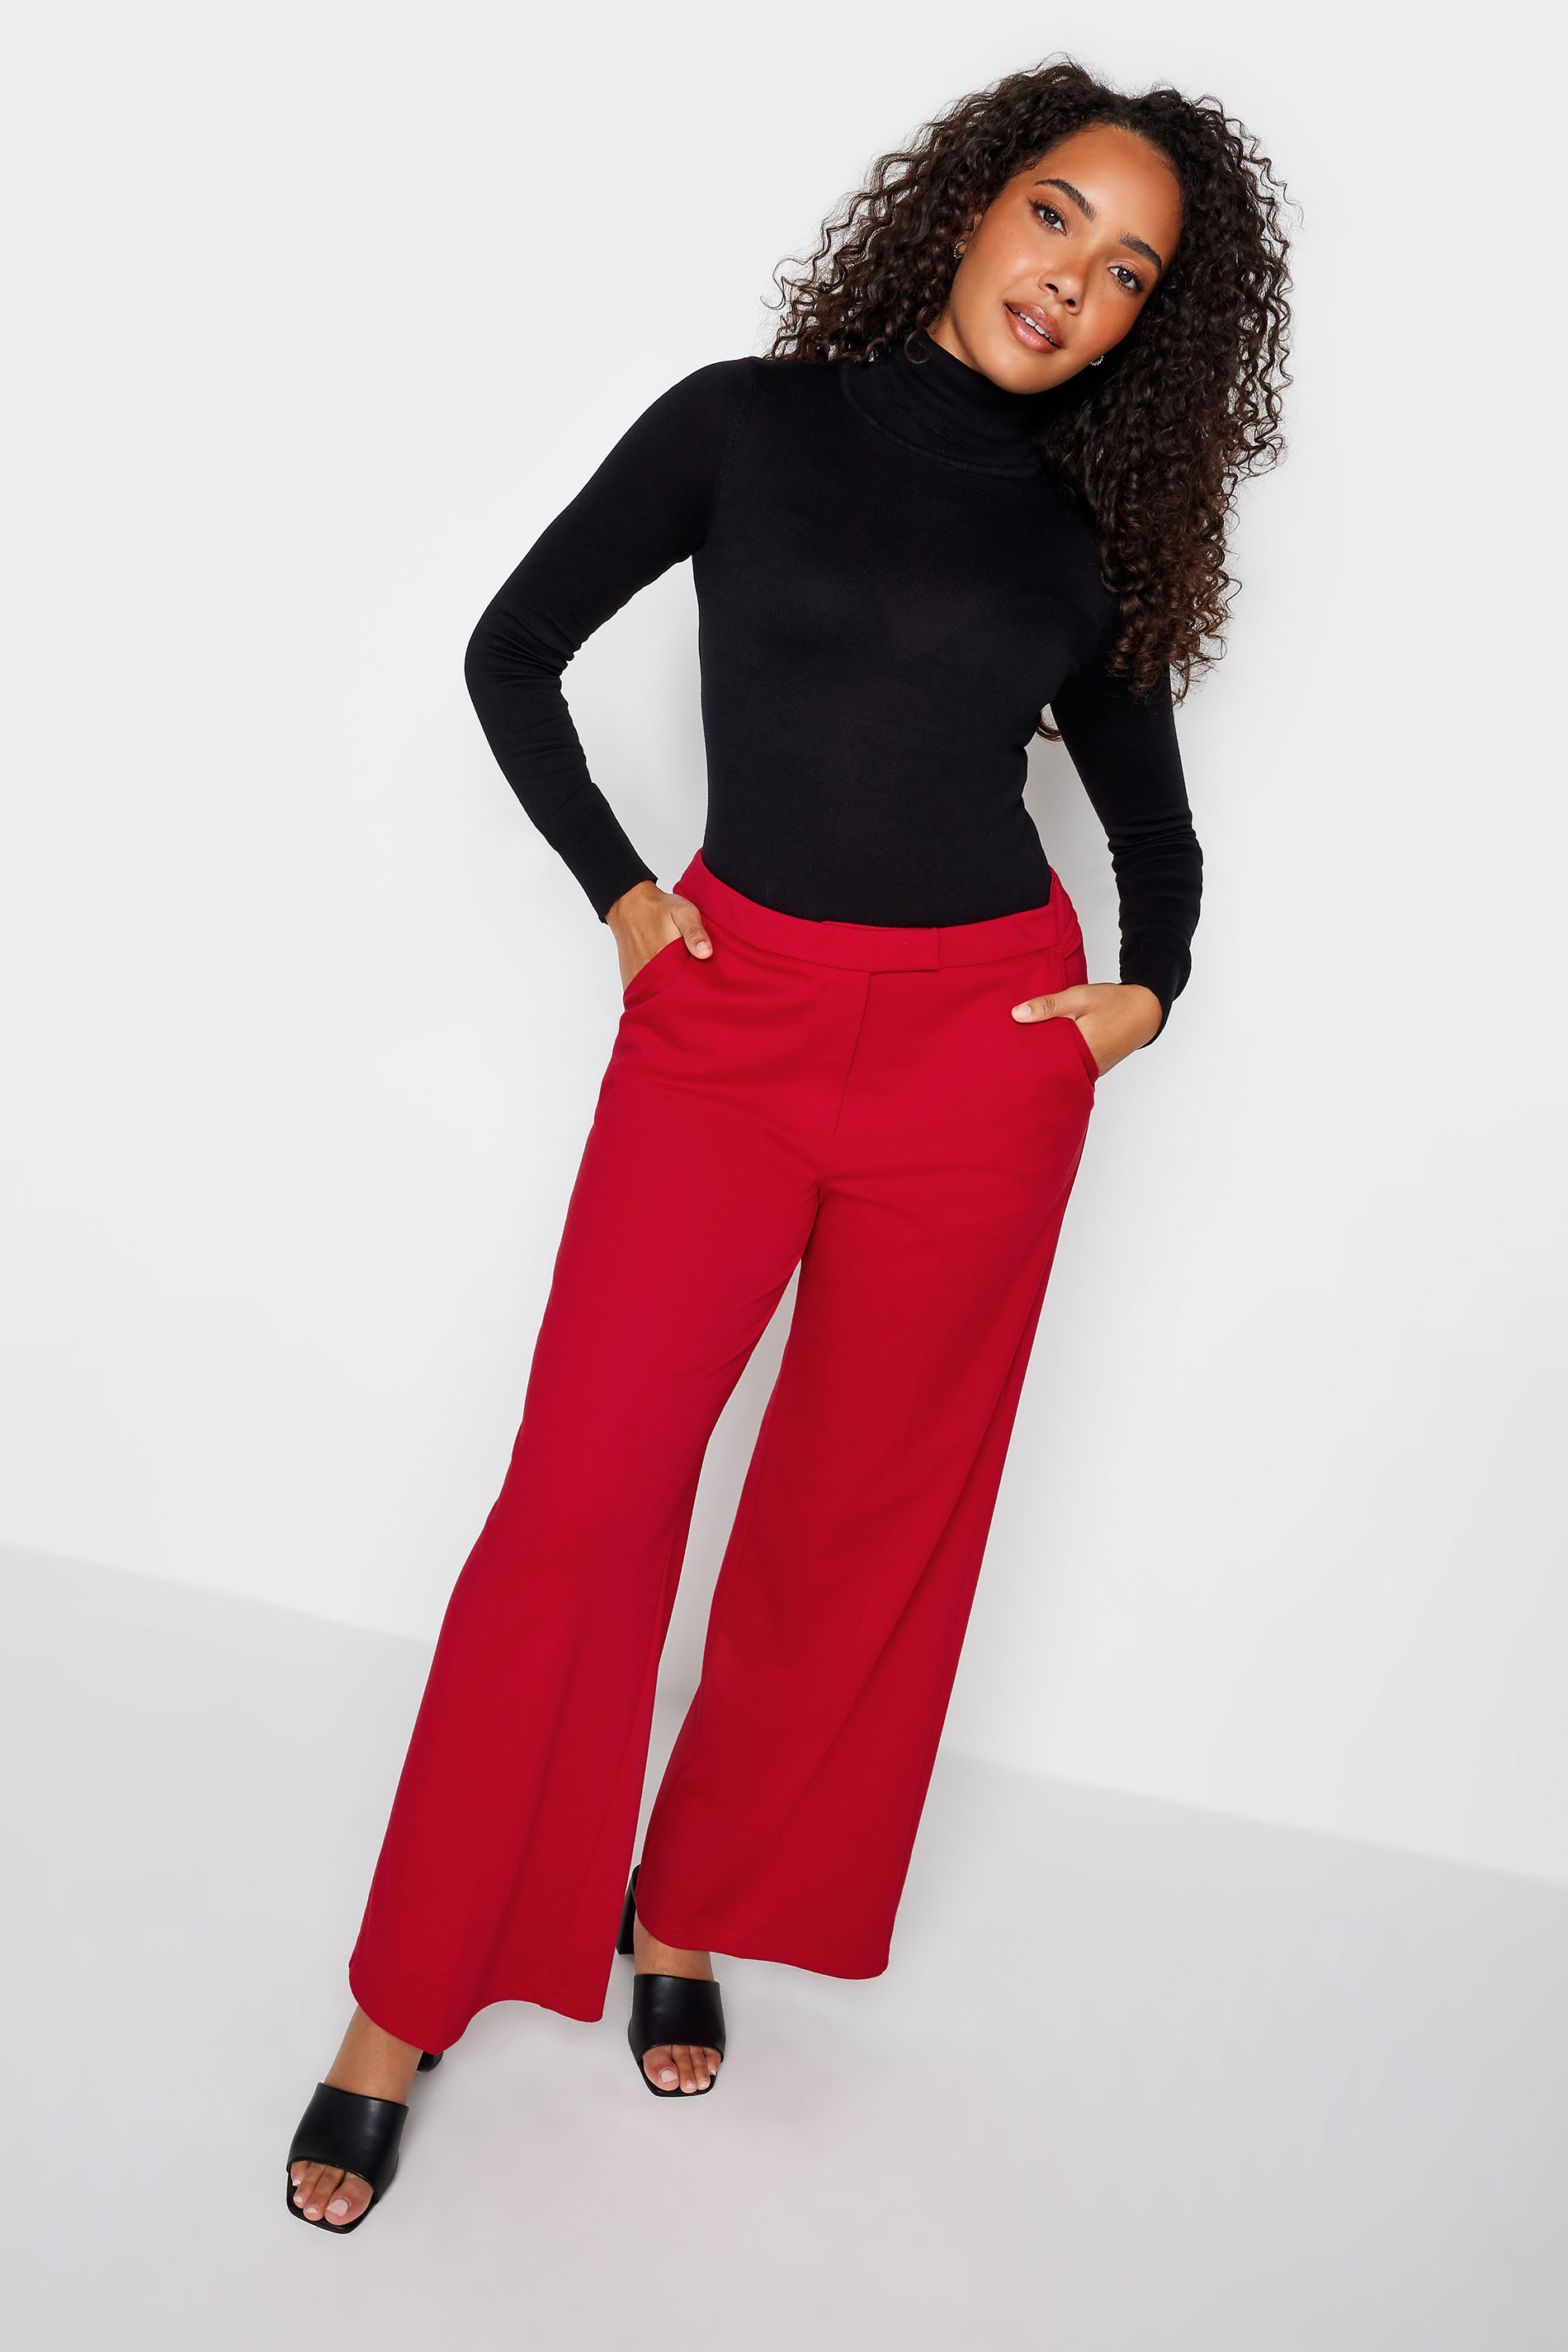 M&Co Red Ponte Wide Leg Trousers